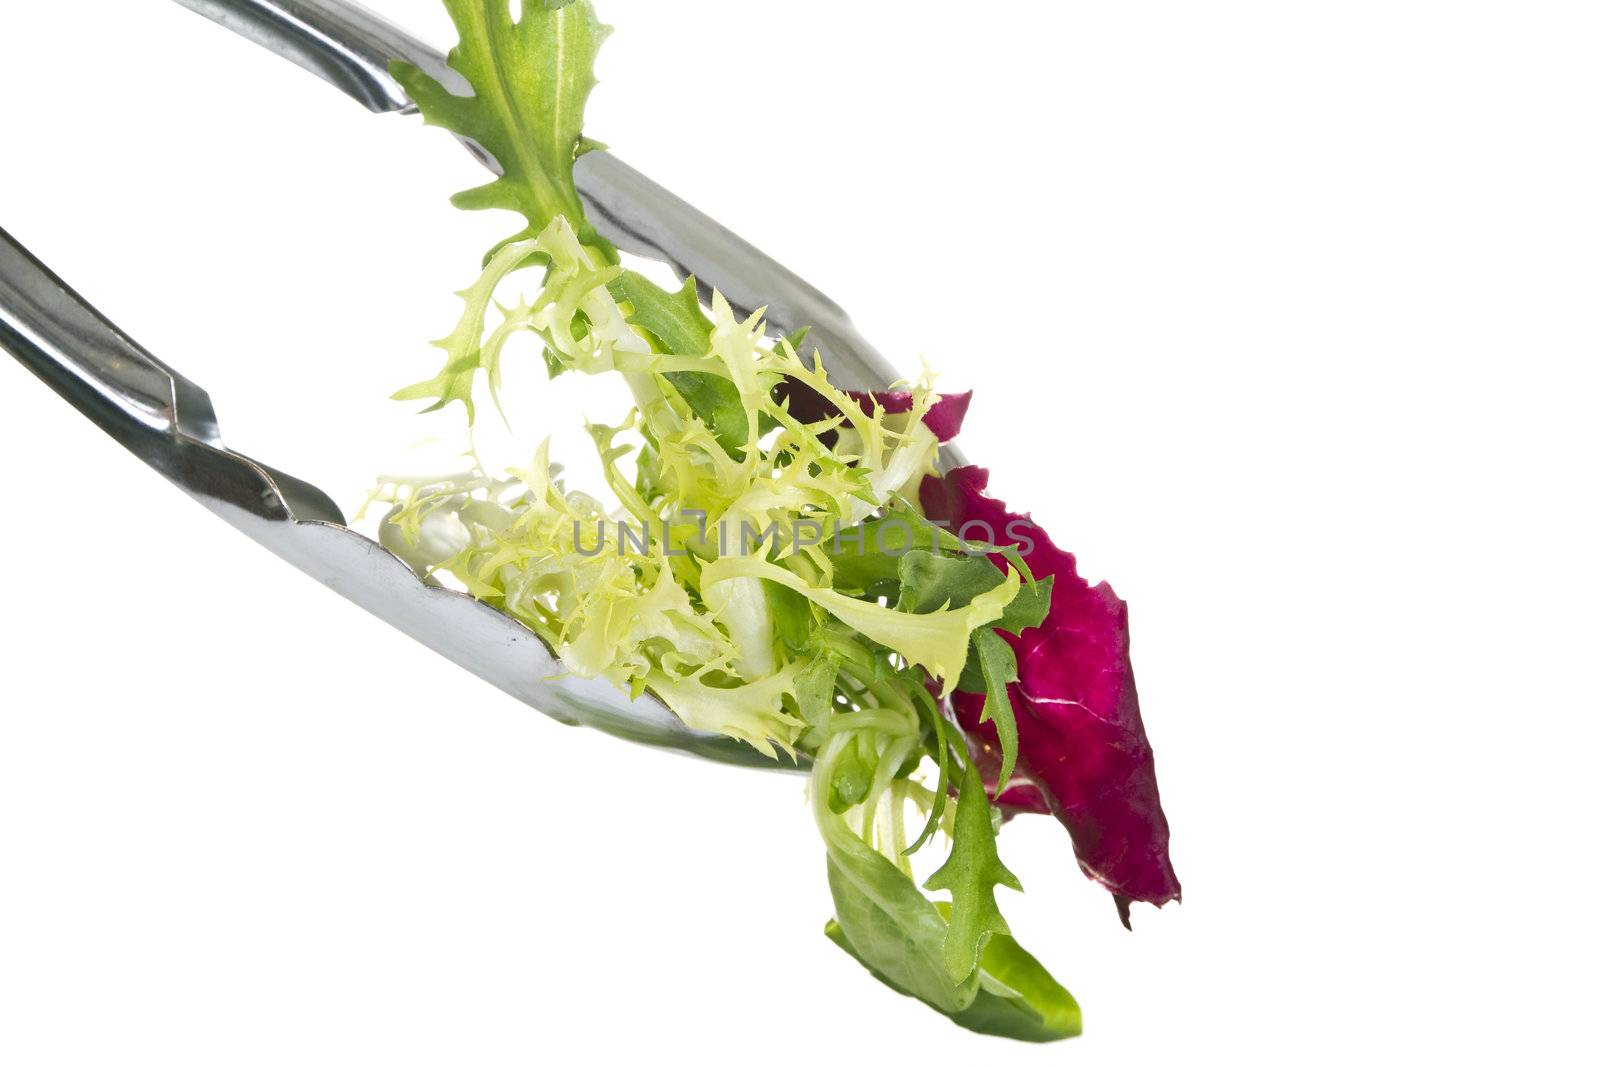 Tongs with salad leaves isolated over white background